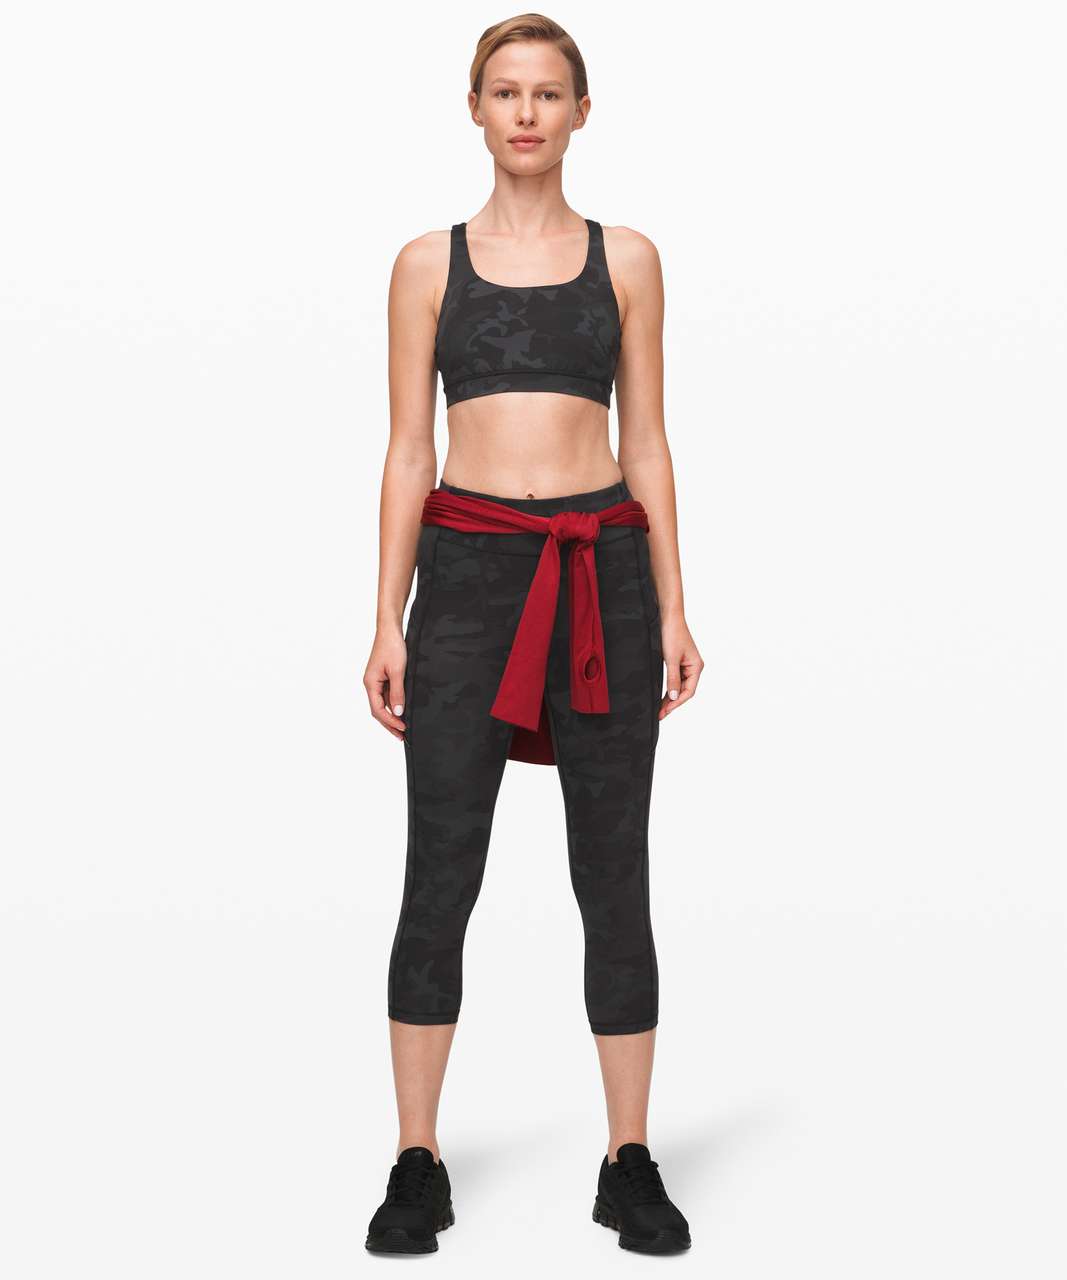 Lululemon Speed Up Crop *21" - Incognito Camo Multi Grey (First Release)